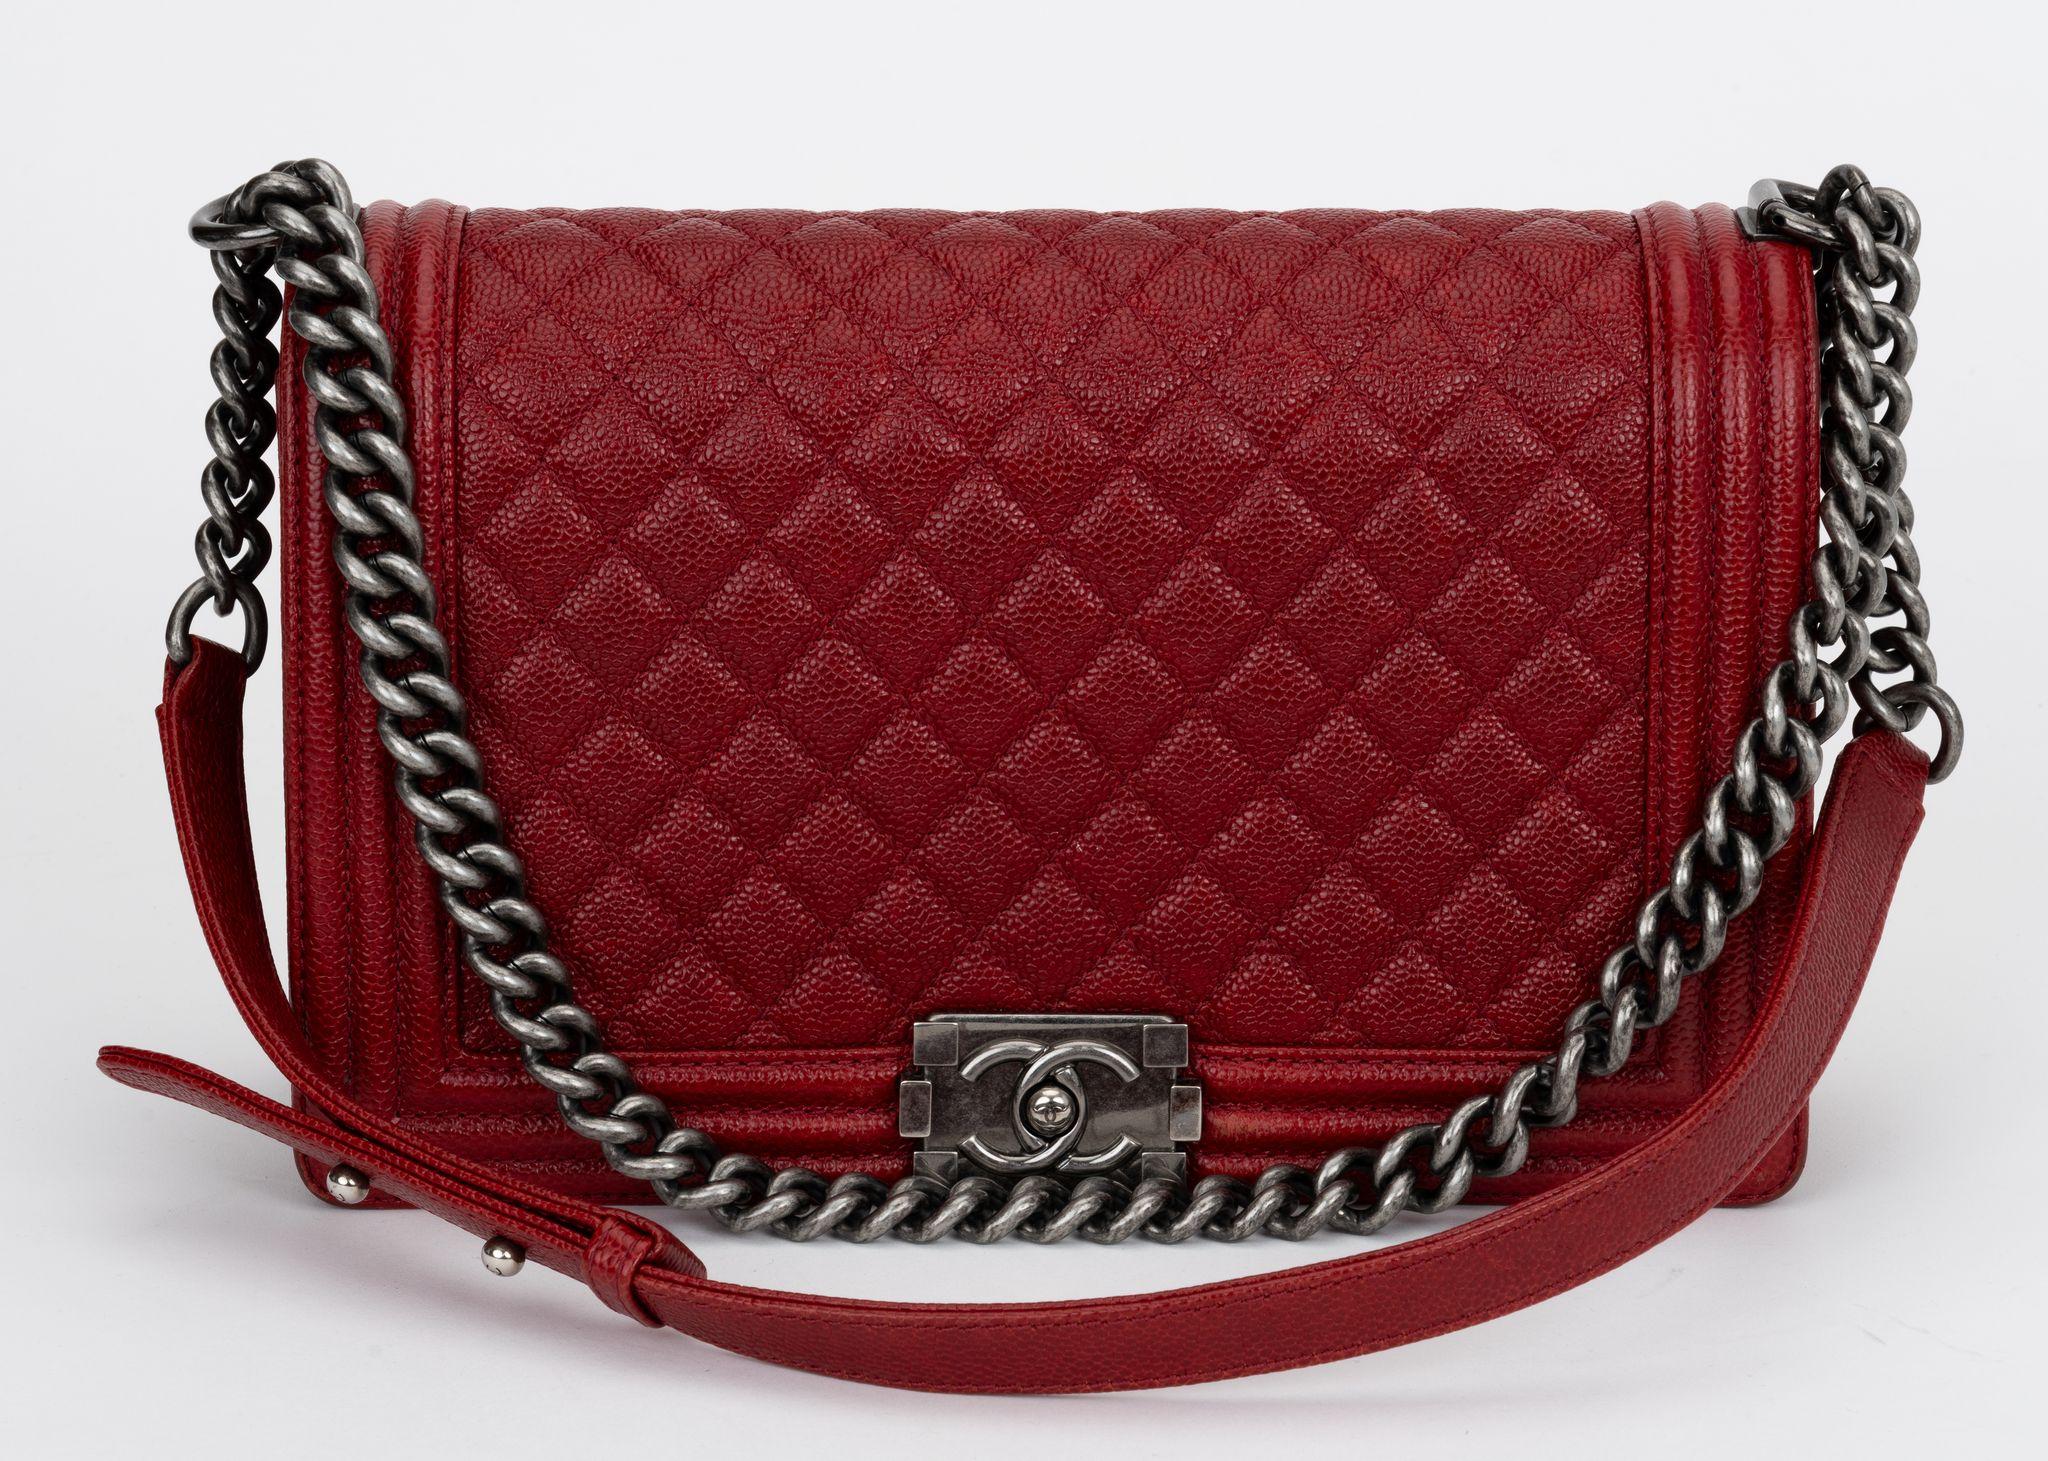 Chanel dark red caviar boy bag with ruthenium hardware. Minor wear on corners. Collection 19. Comes with hologram, id card and original dust cover.